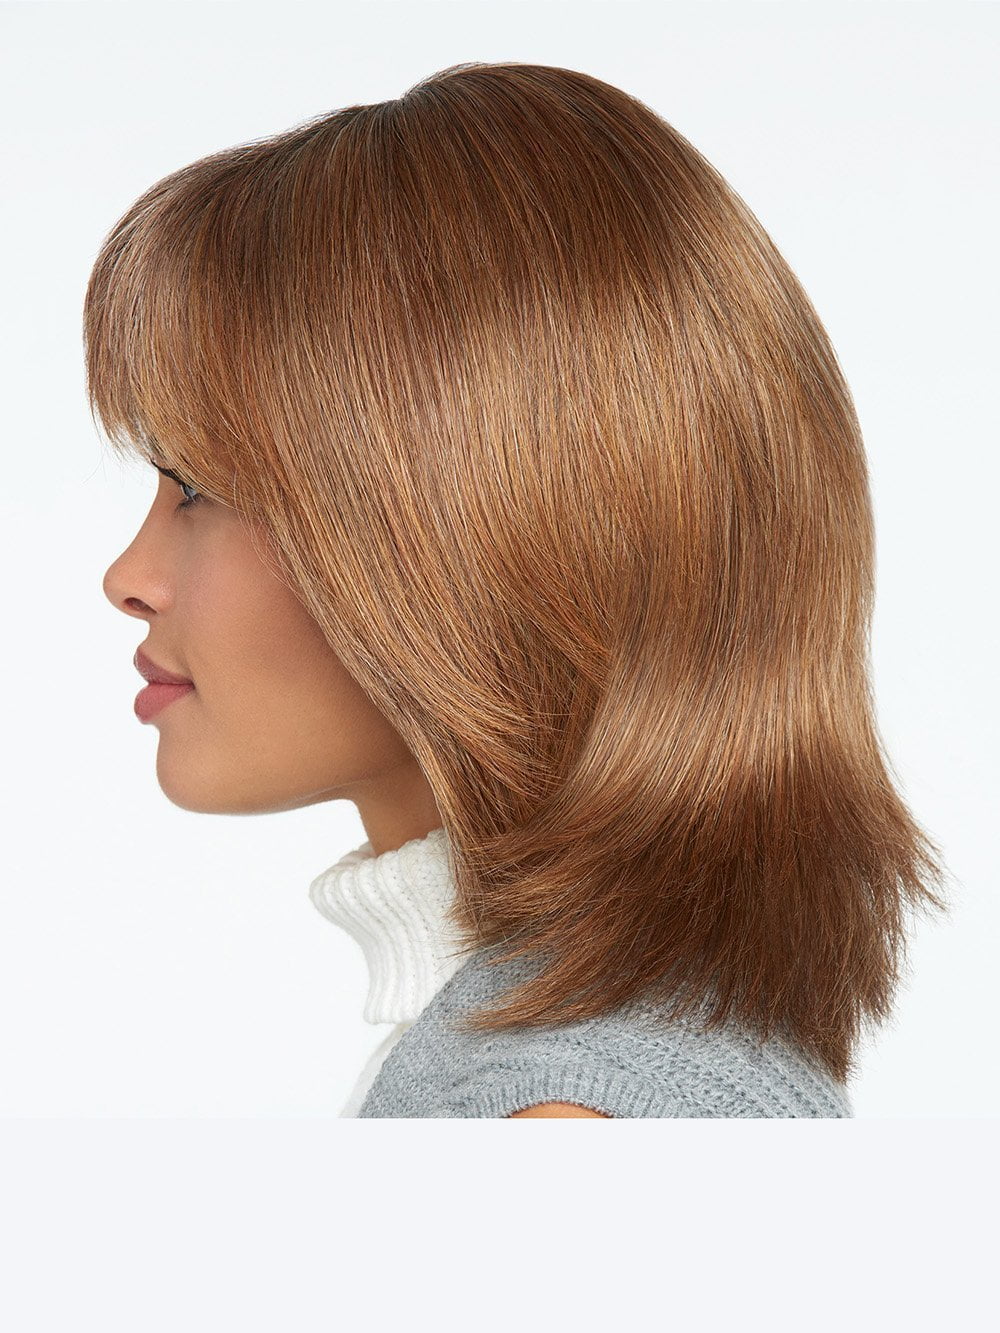 This precision crafted collarbone length cut reflects a popular trend offered in today’s top salons